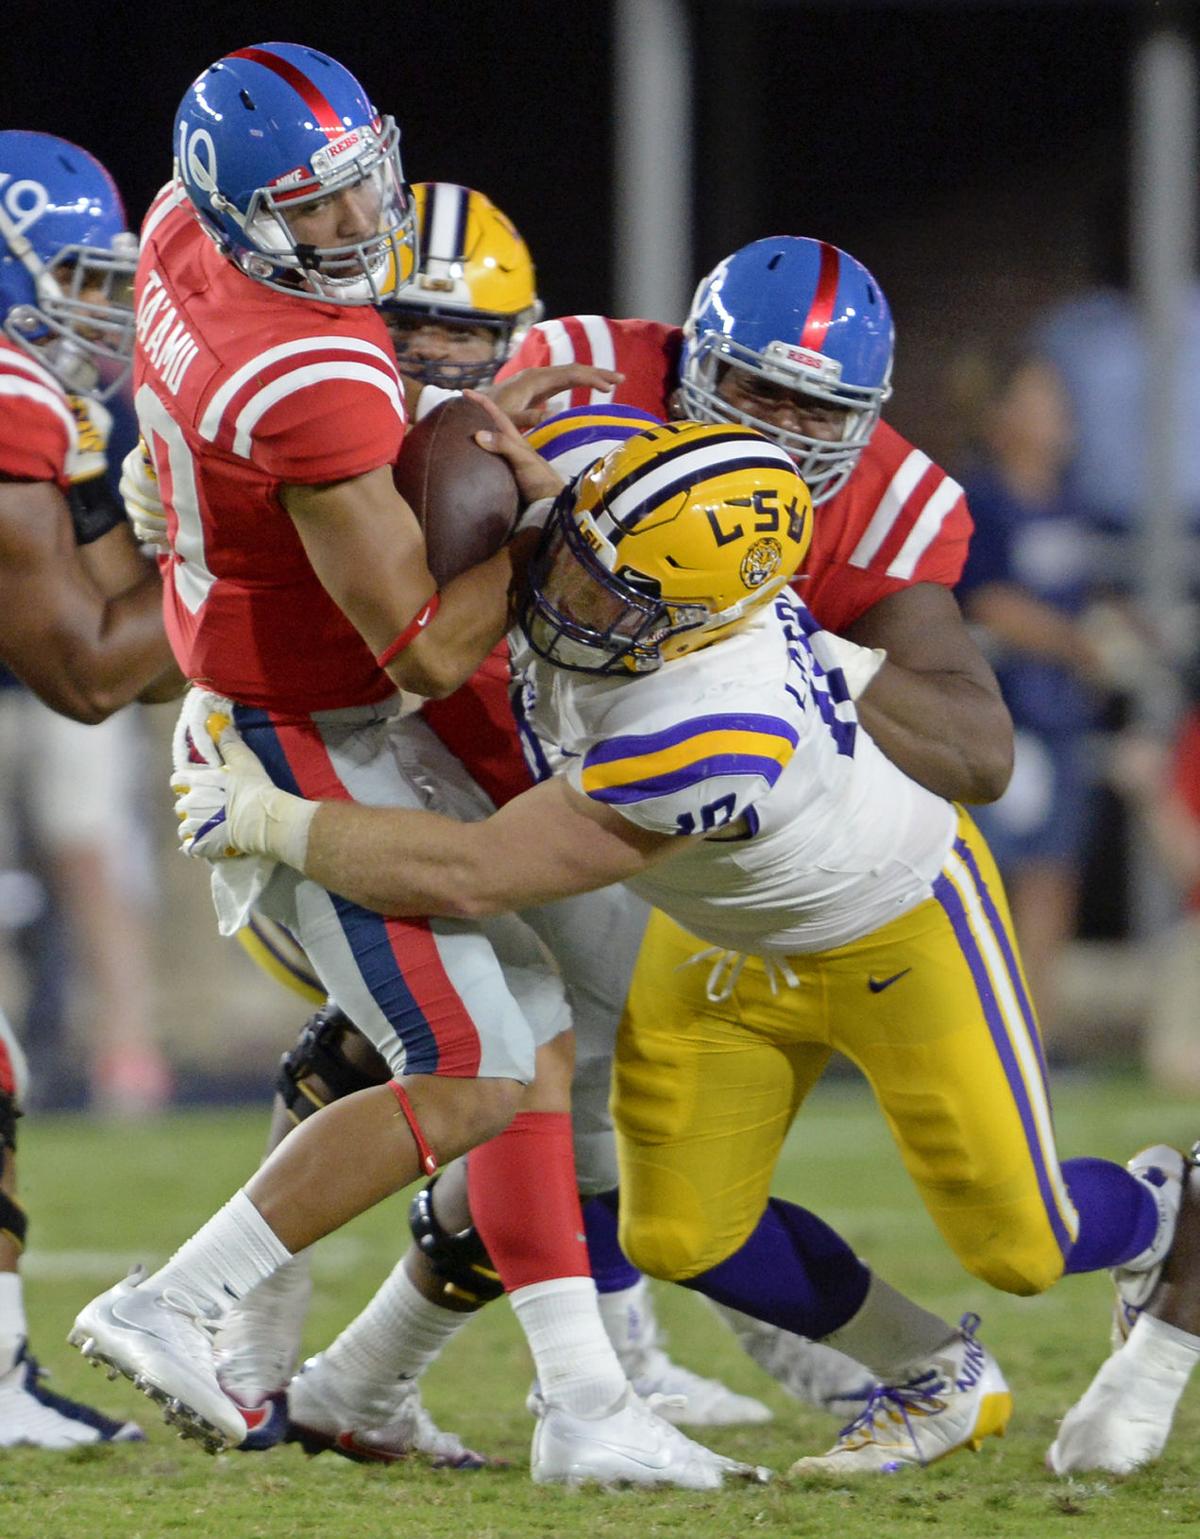 Ole Miss vs. LSU scouting report Learn more about the Rebels' offense